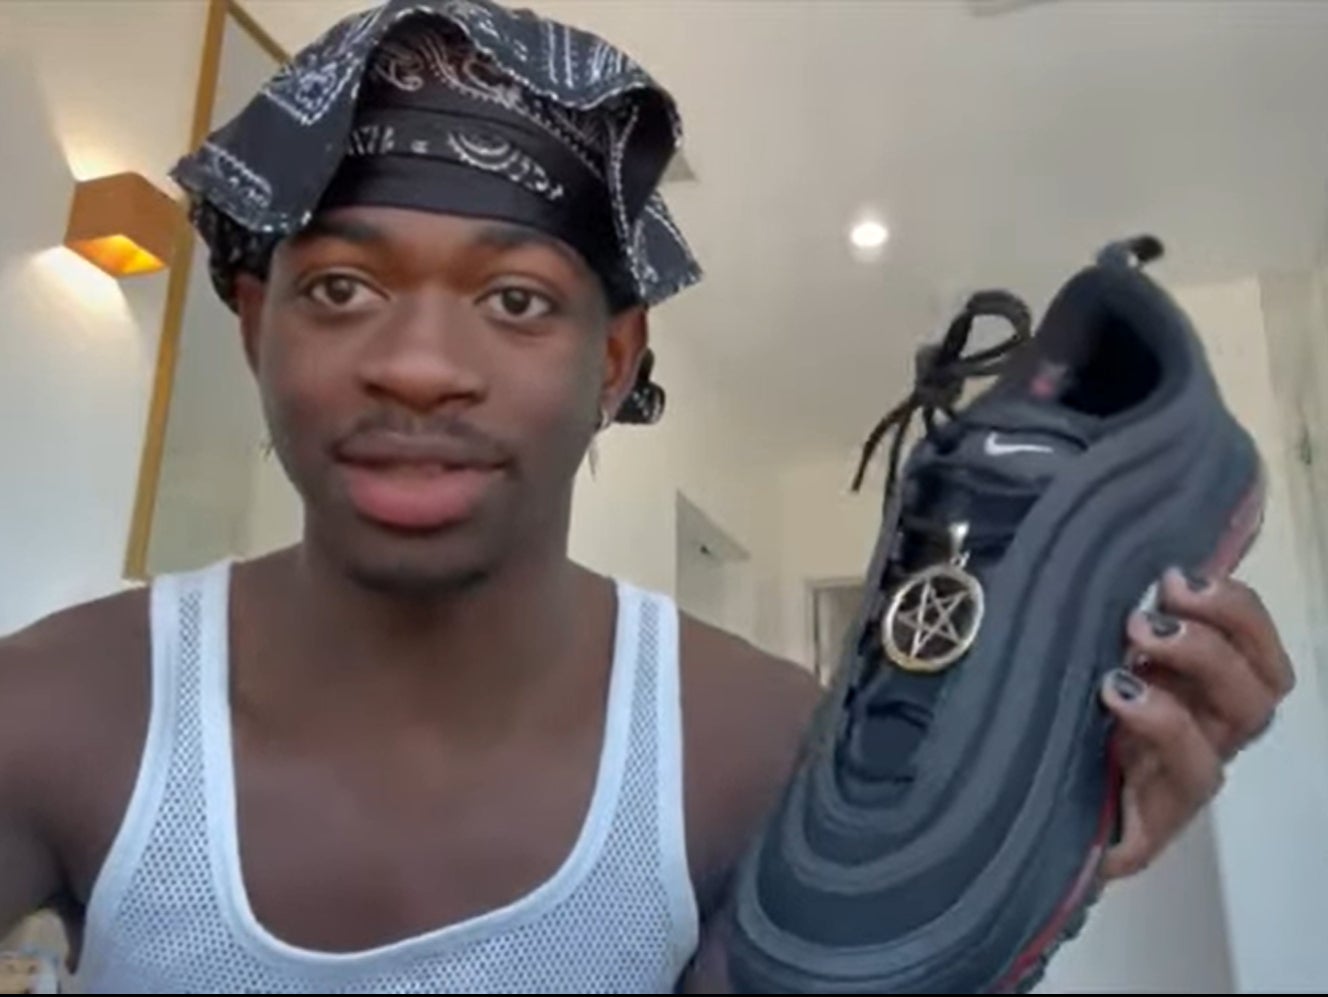 File image: Lil Nas X with Satan Shoes